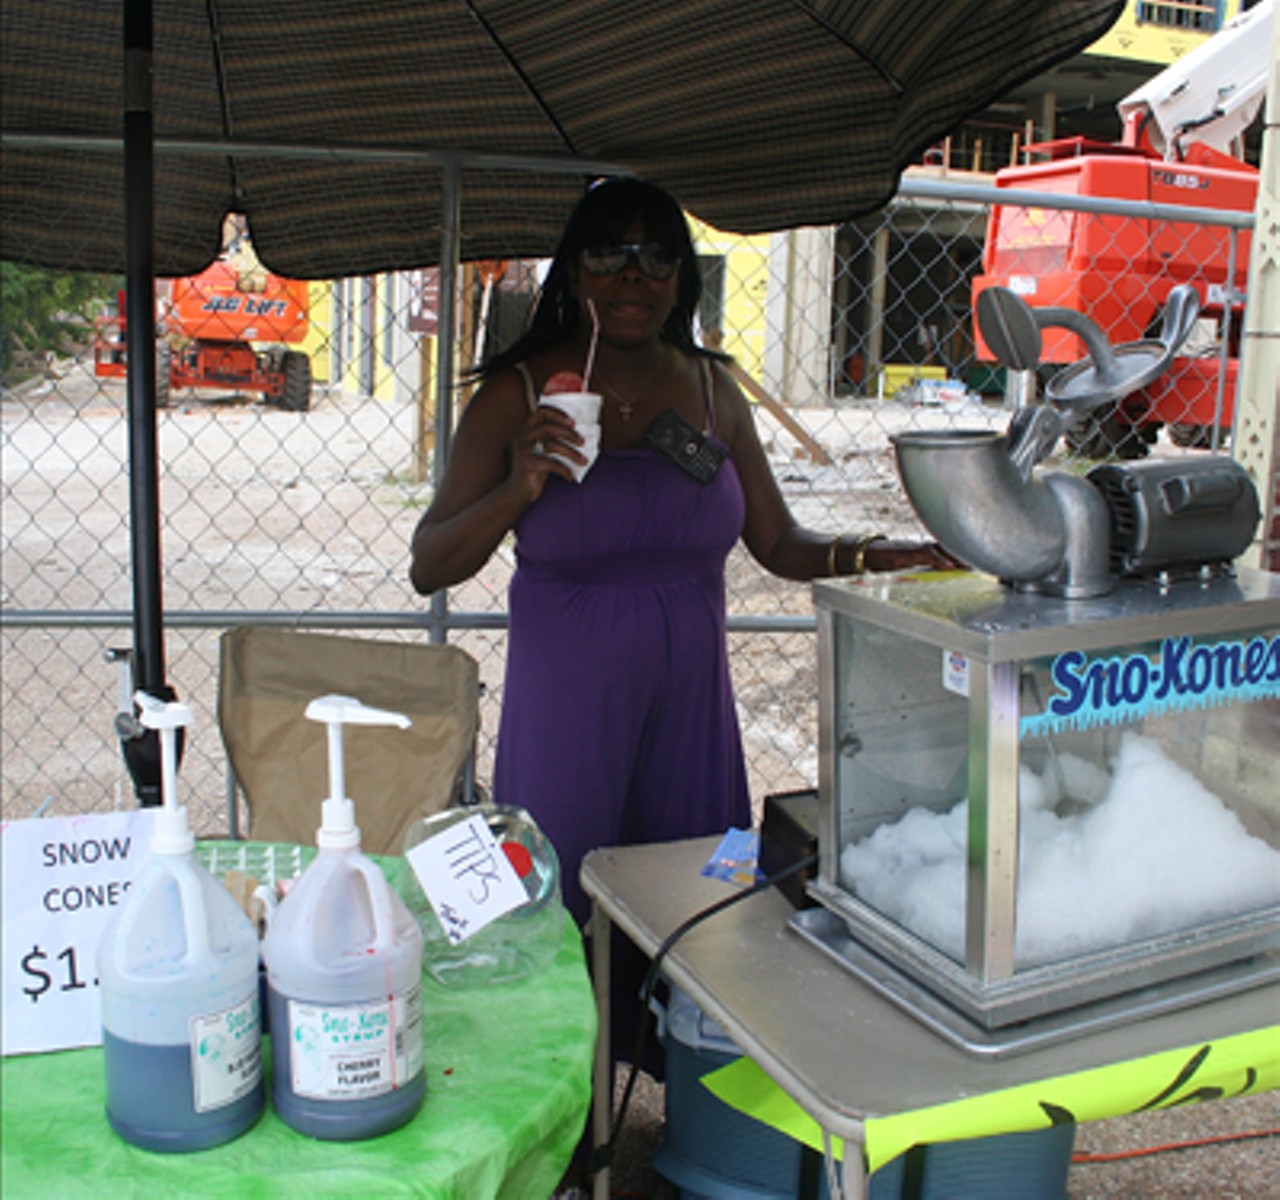 Tabatha Pikes, Owner of Tabu Boutique, offered up dollar snowcones outside and discounts inside of her shop.